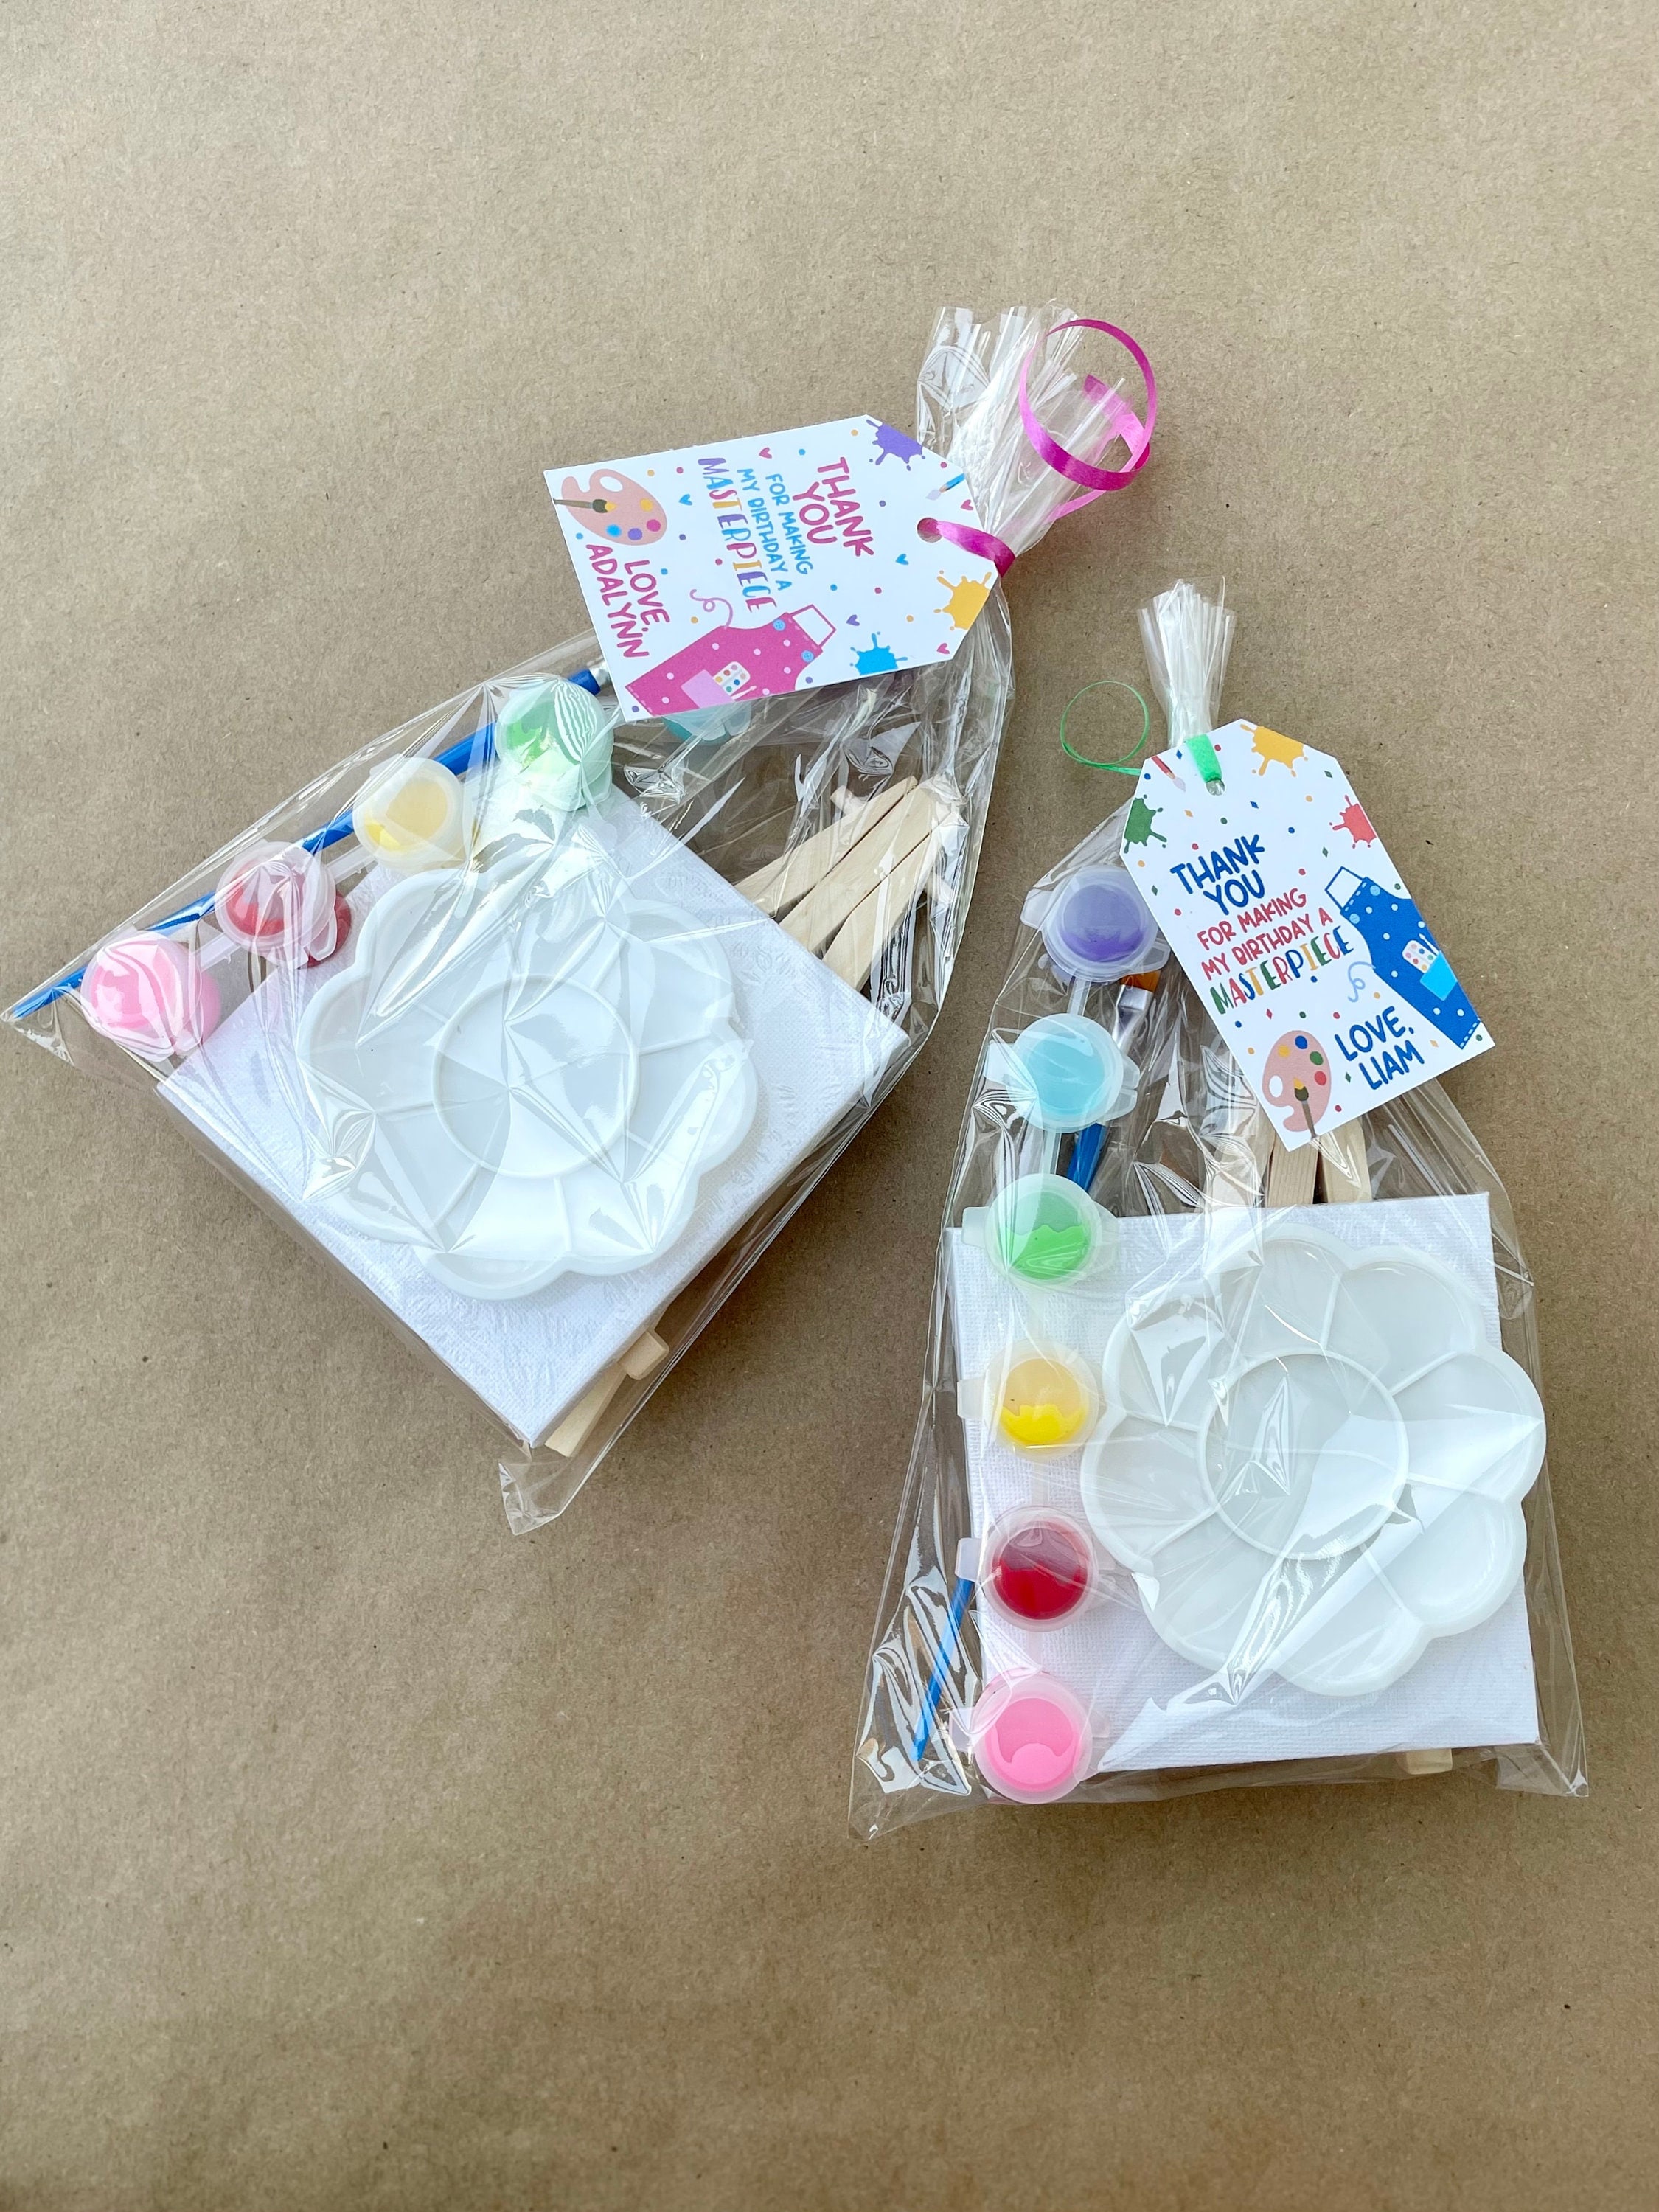  Art Party Bags Paint Art Party Treat Bags Sip and Paint Party  Goodies Bags for Paint Splatter Party Art Party Decorations (16 Pieces,Art  Style) : Toys & Games